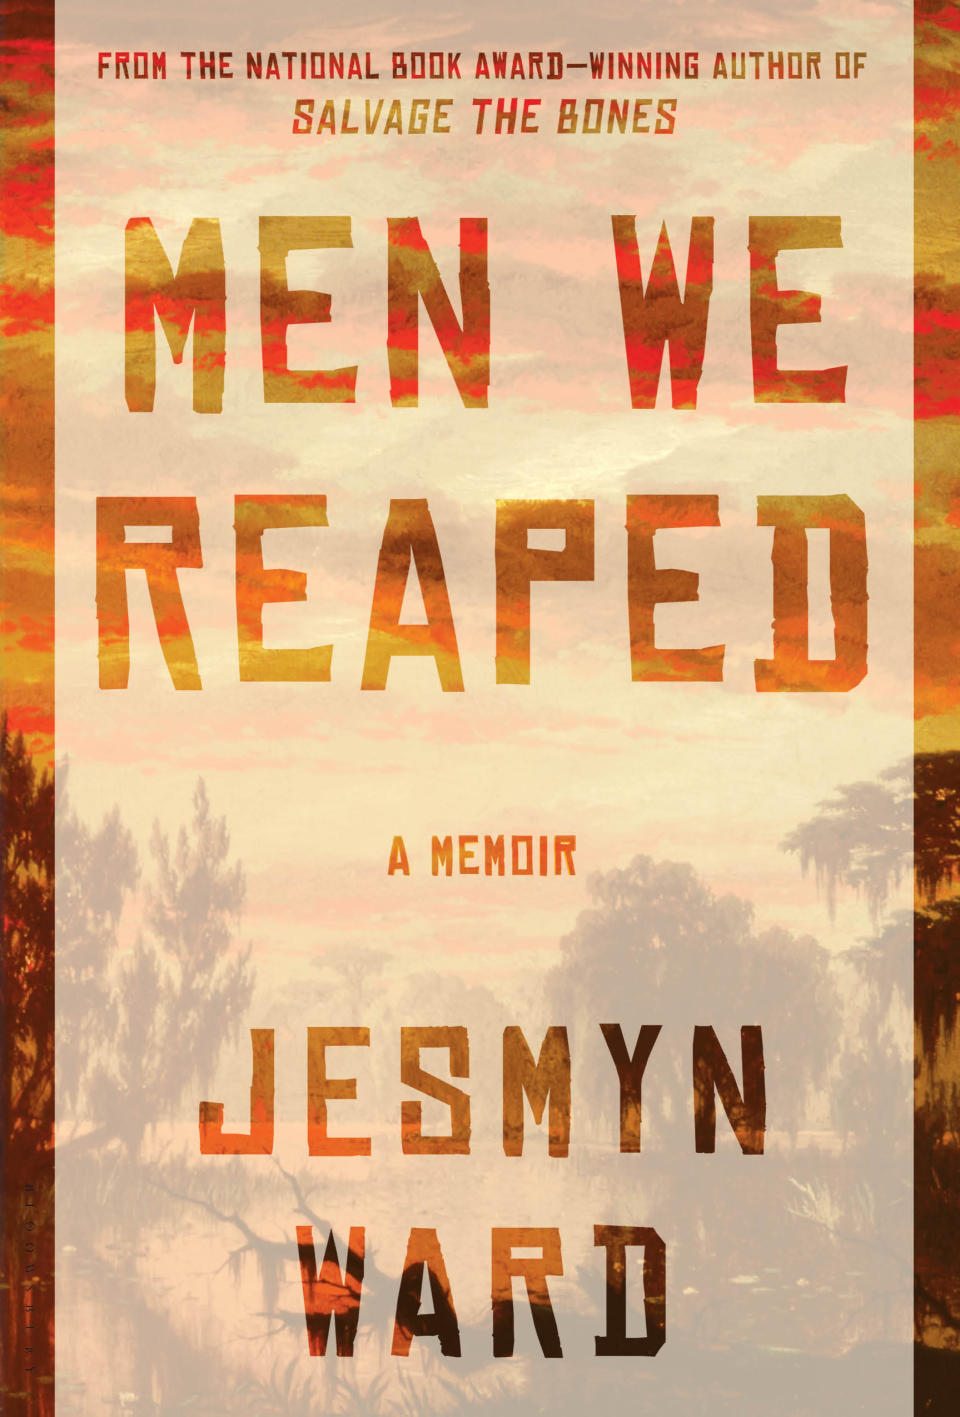 This book cover image released by Bloomsbury USA shows "Men We Reaped," by Jesmyn Ward. The memoir will be released on Sept. 17. (AP Photo/Bloomsbury USA)